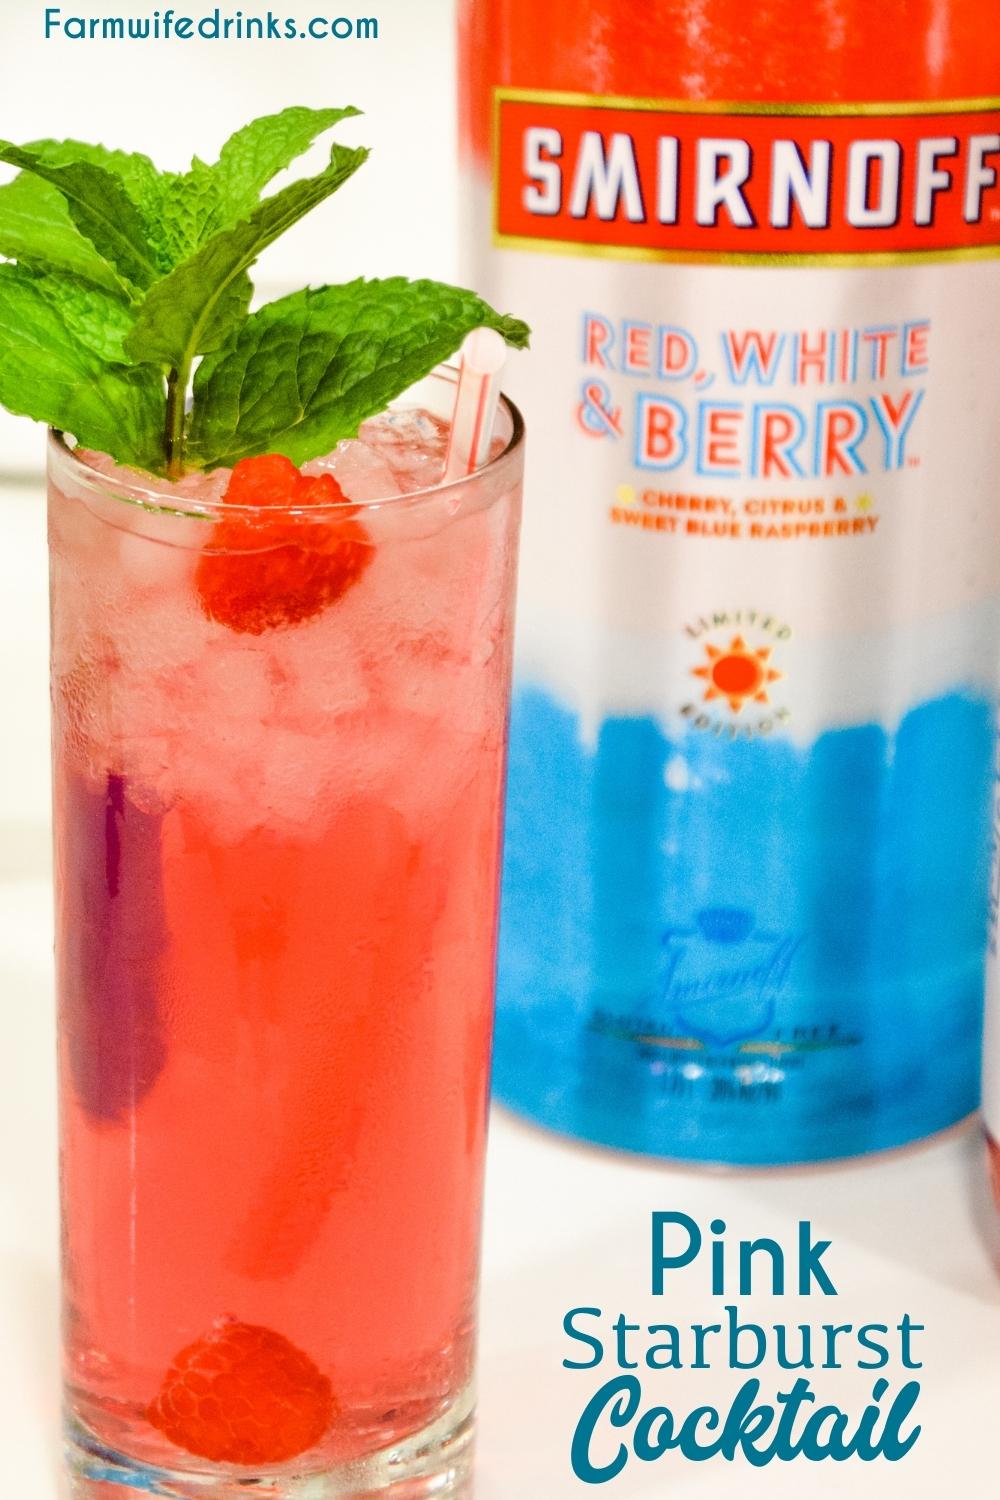 I love a low-calorie cocktail and this berry vodka cocktail with the fun red, white and berry Smirnoff Vodka mixed with berry lemonade is my favorite summer cocktail.